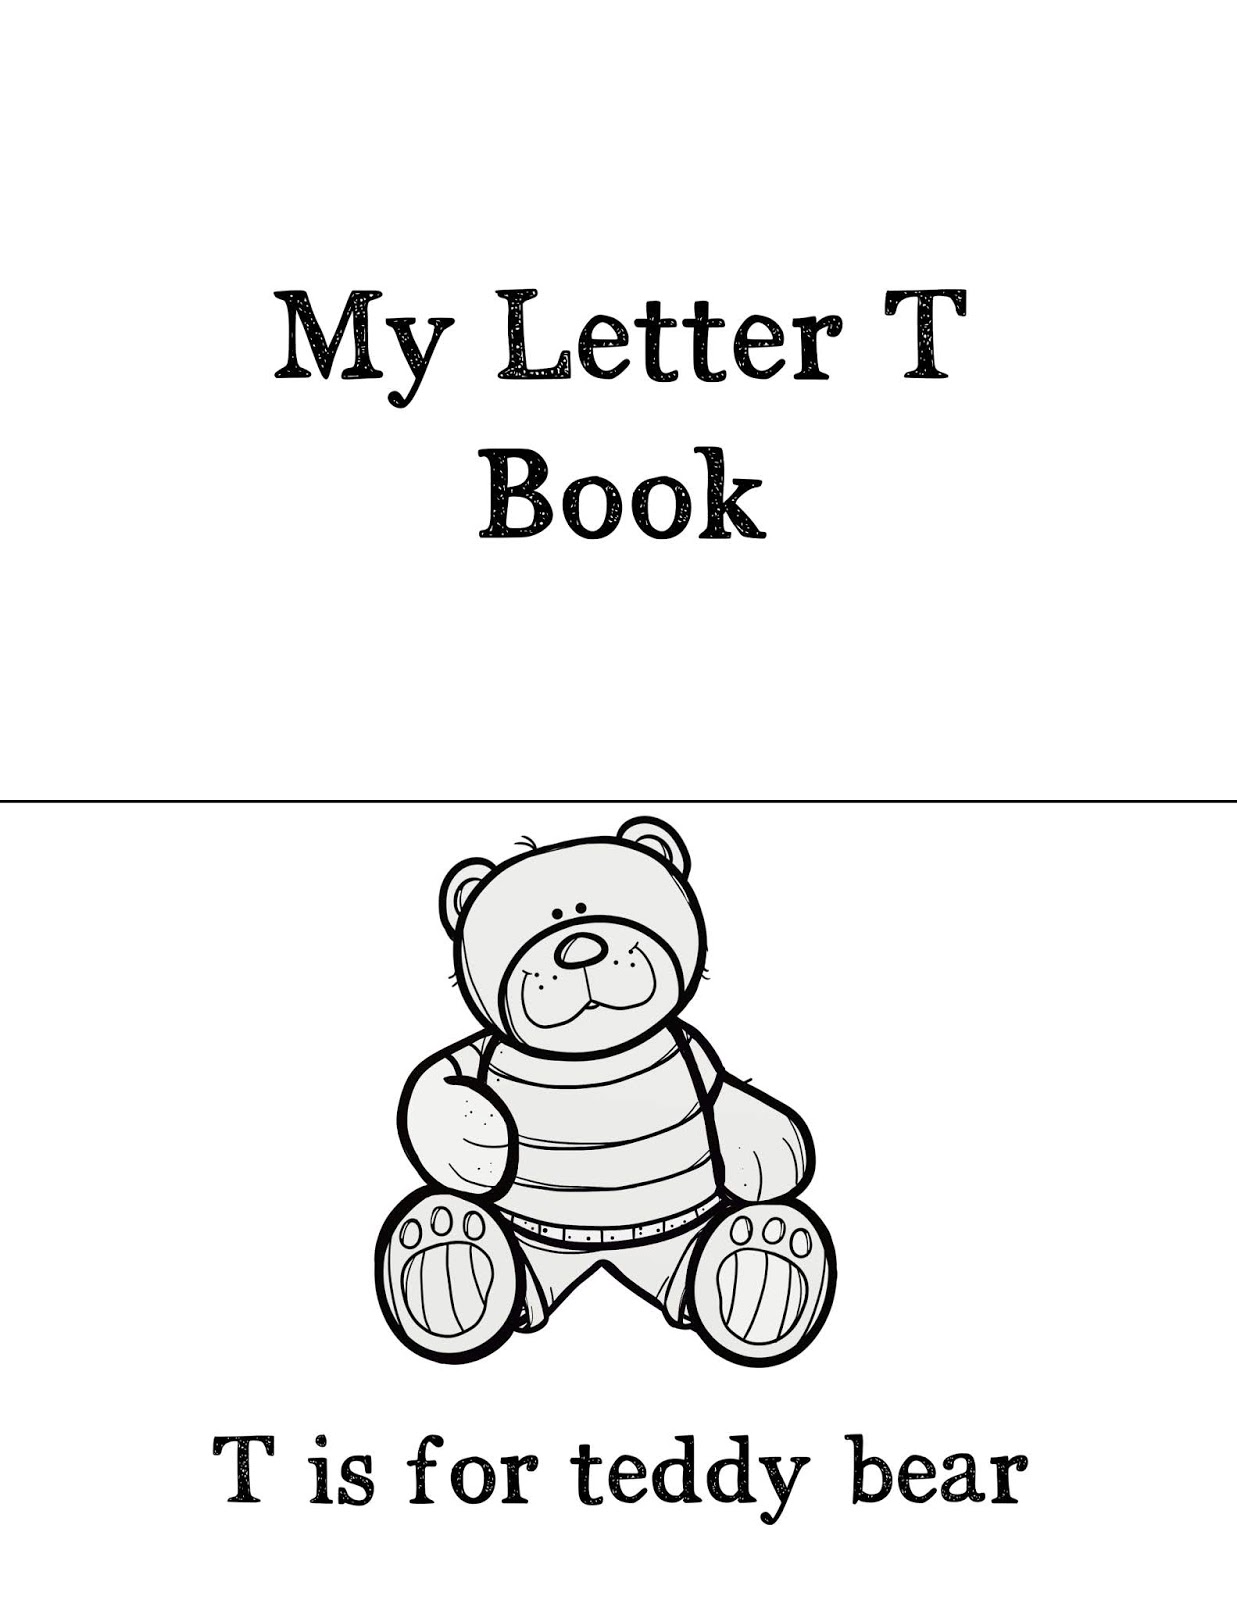 My letter book. Letter t book.